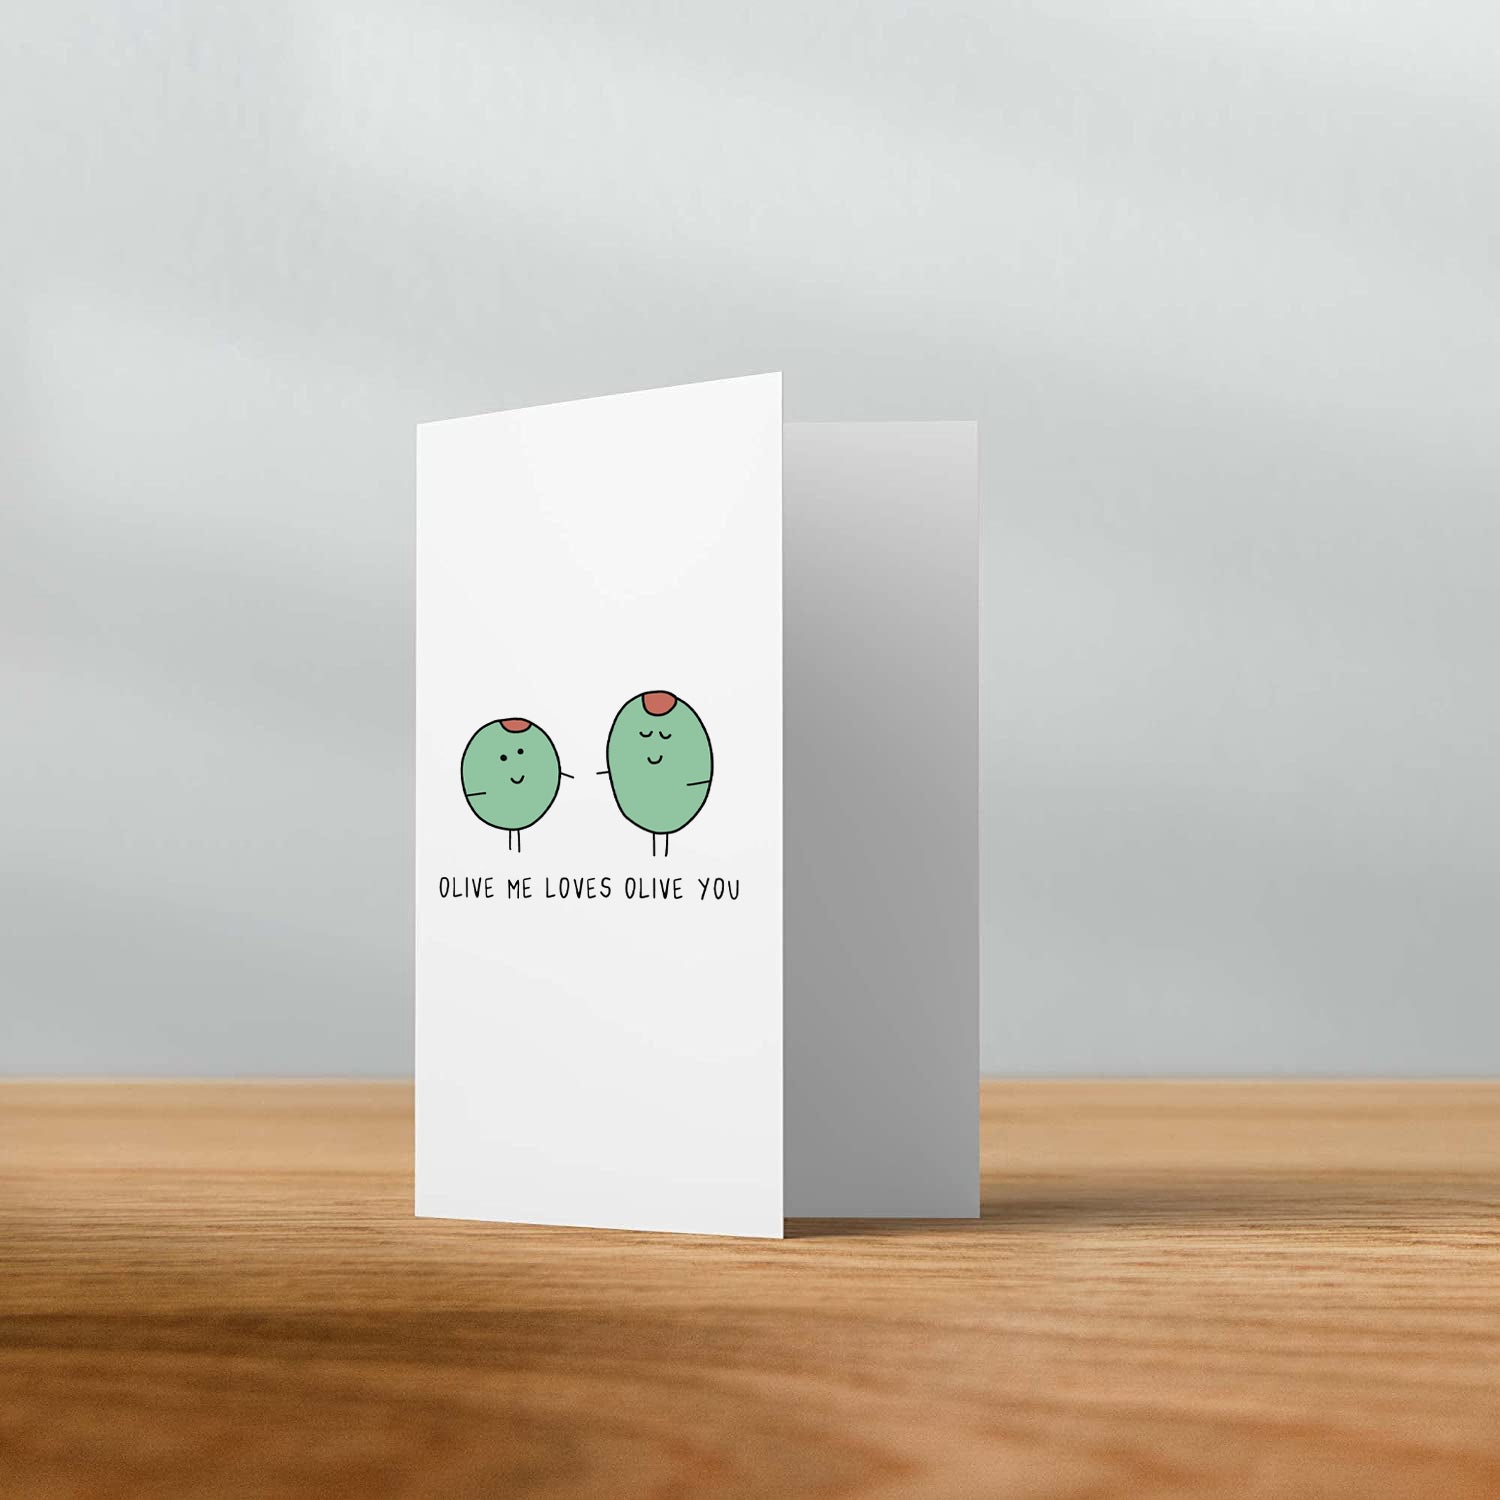 A Olive Me Card with two green birds on it. (Brand Name: rockdoodles)